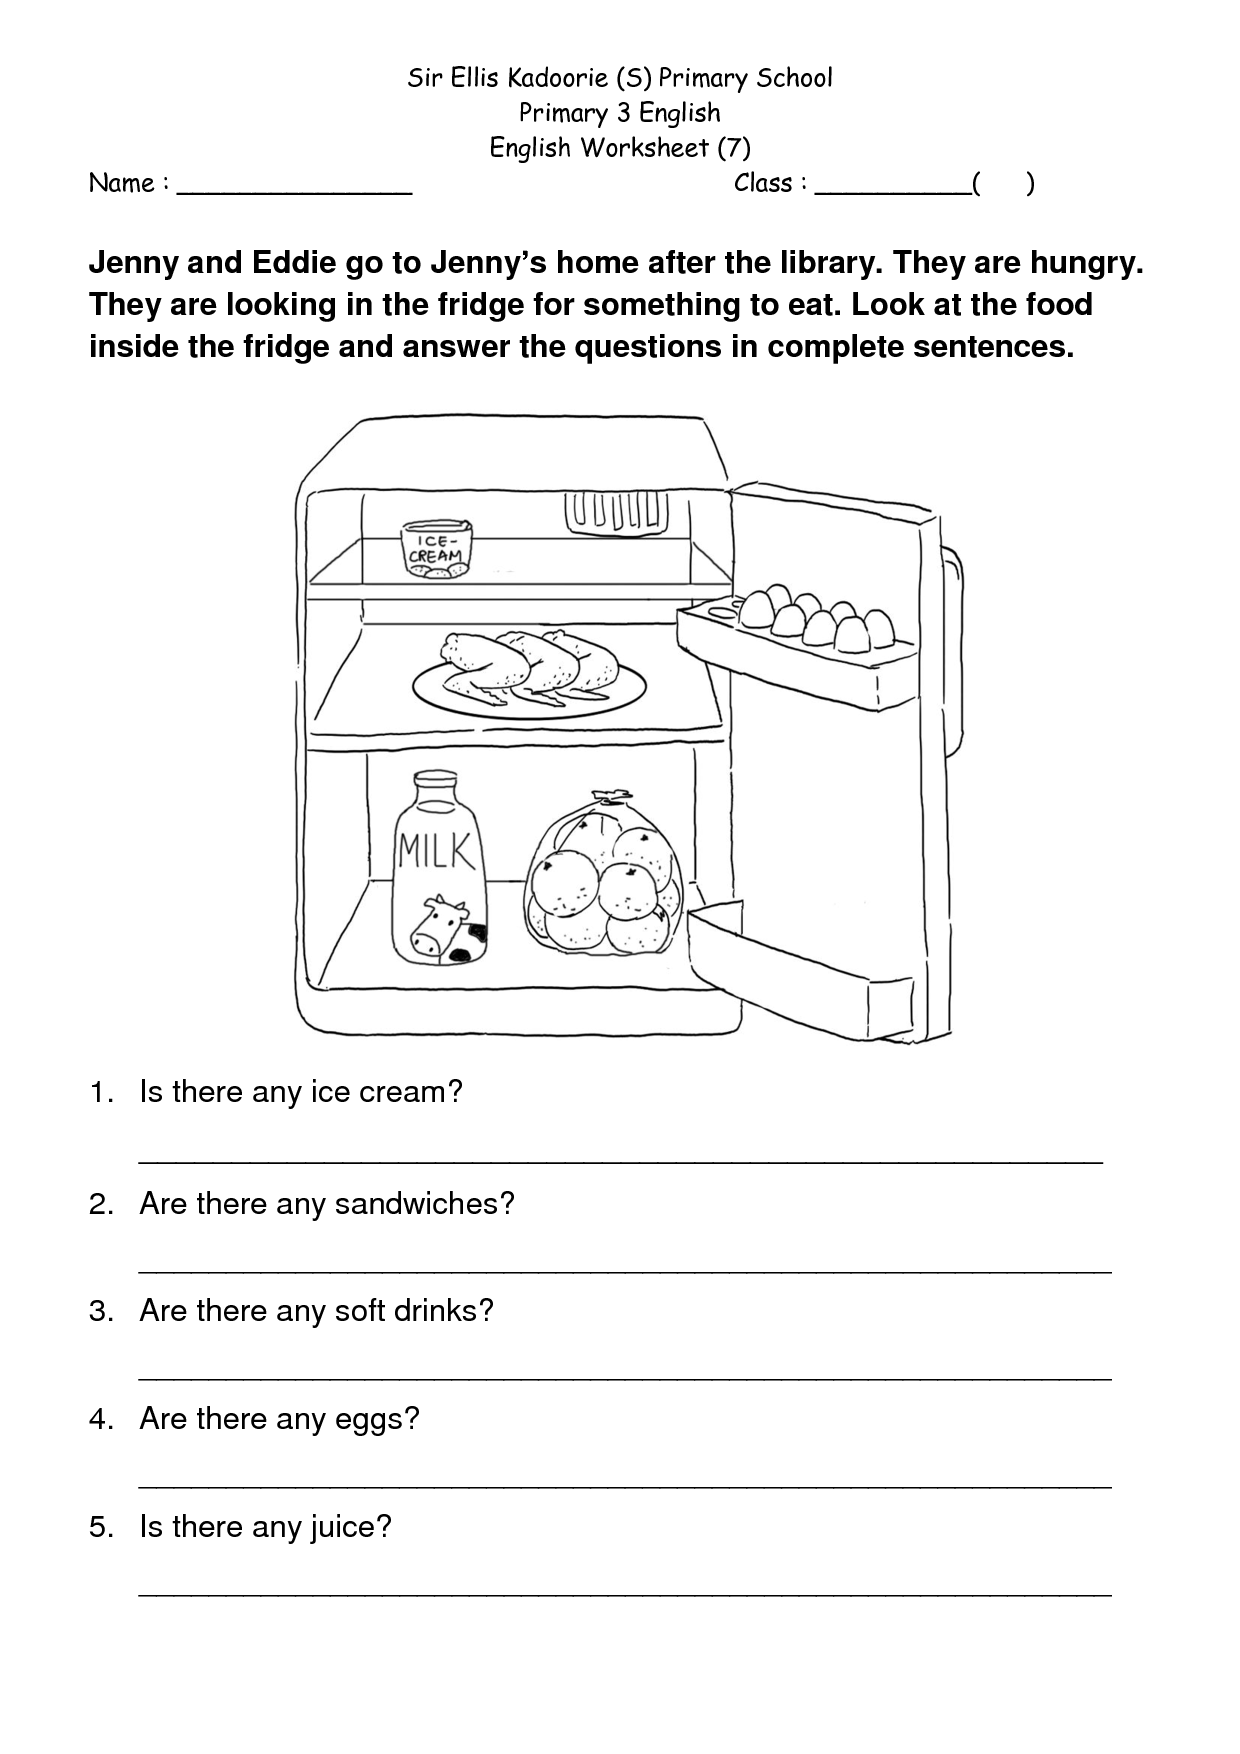 english-composition-primary-3-worksheets-printable